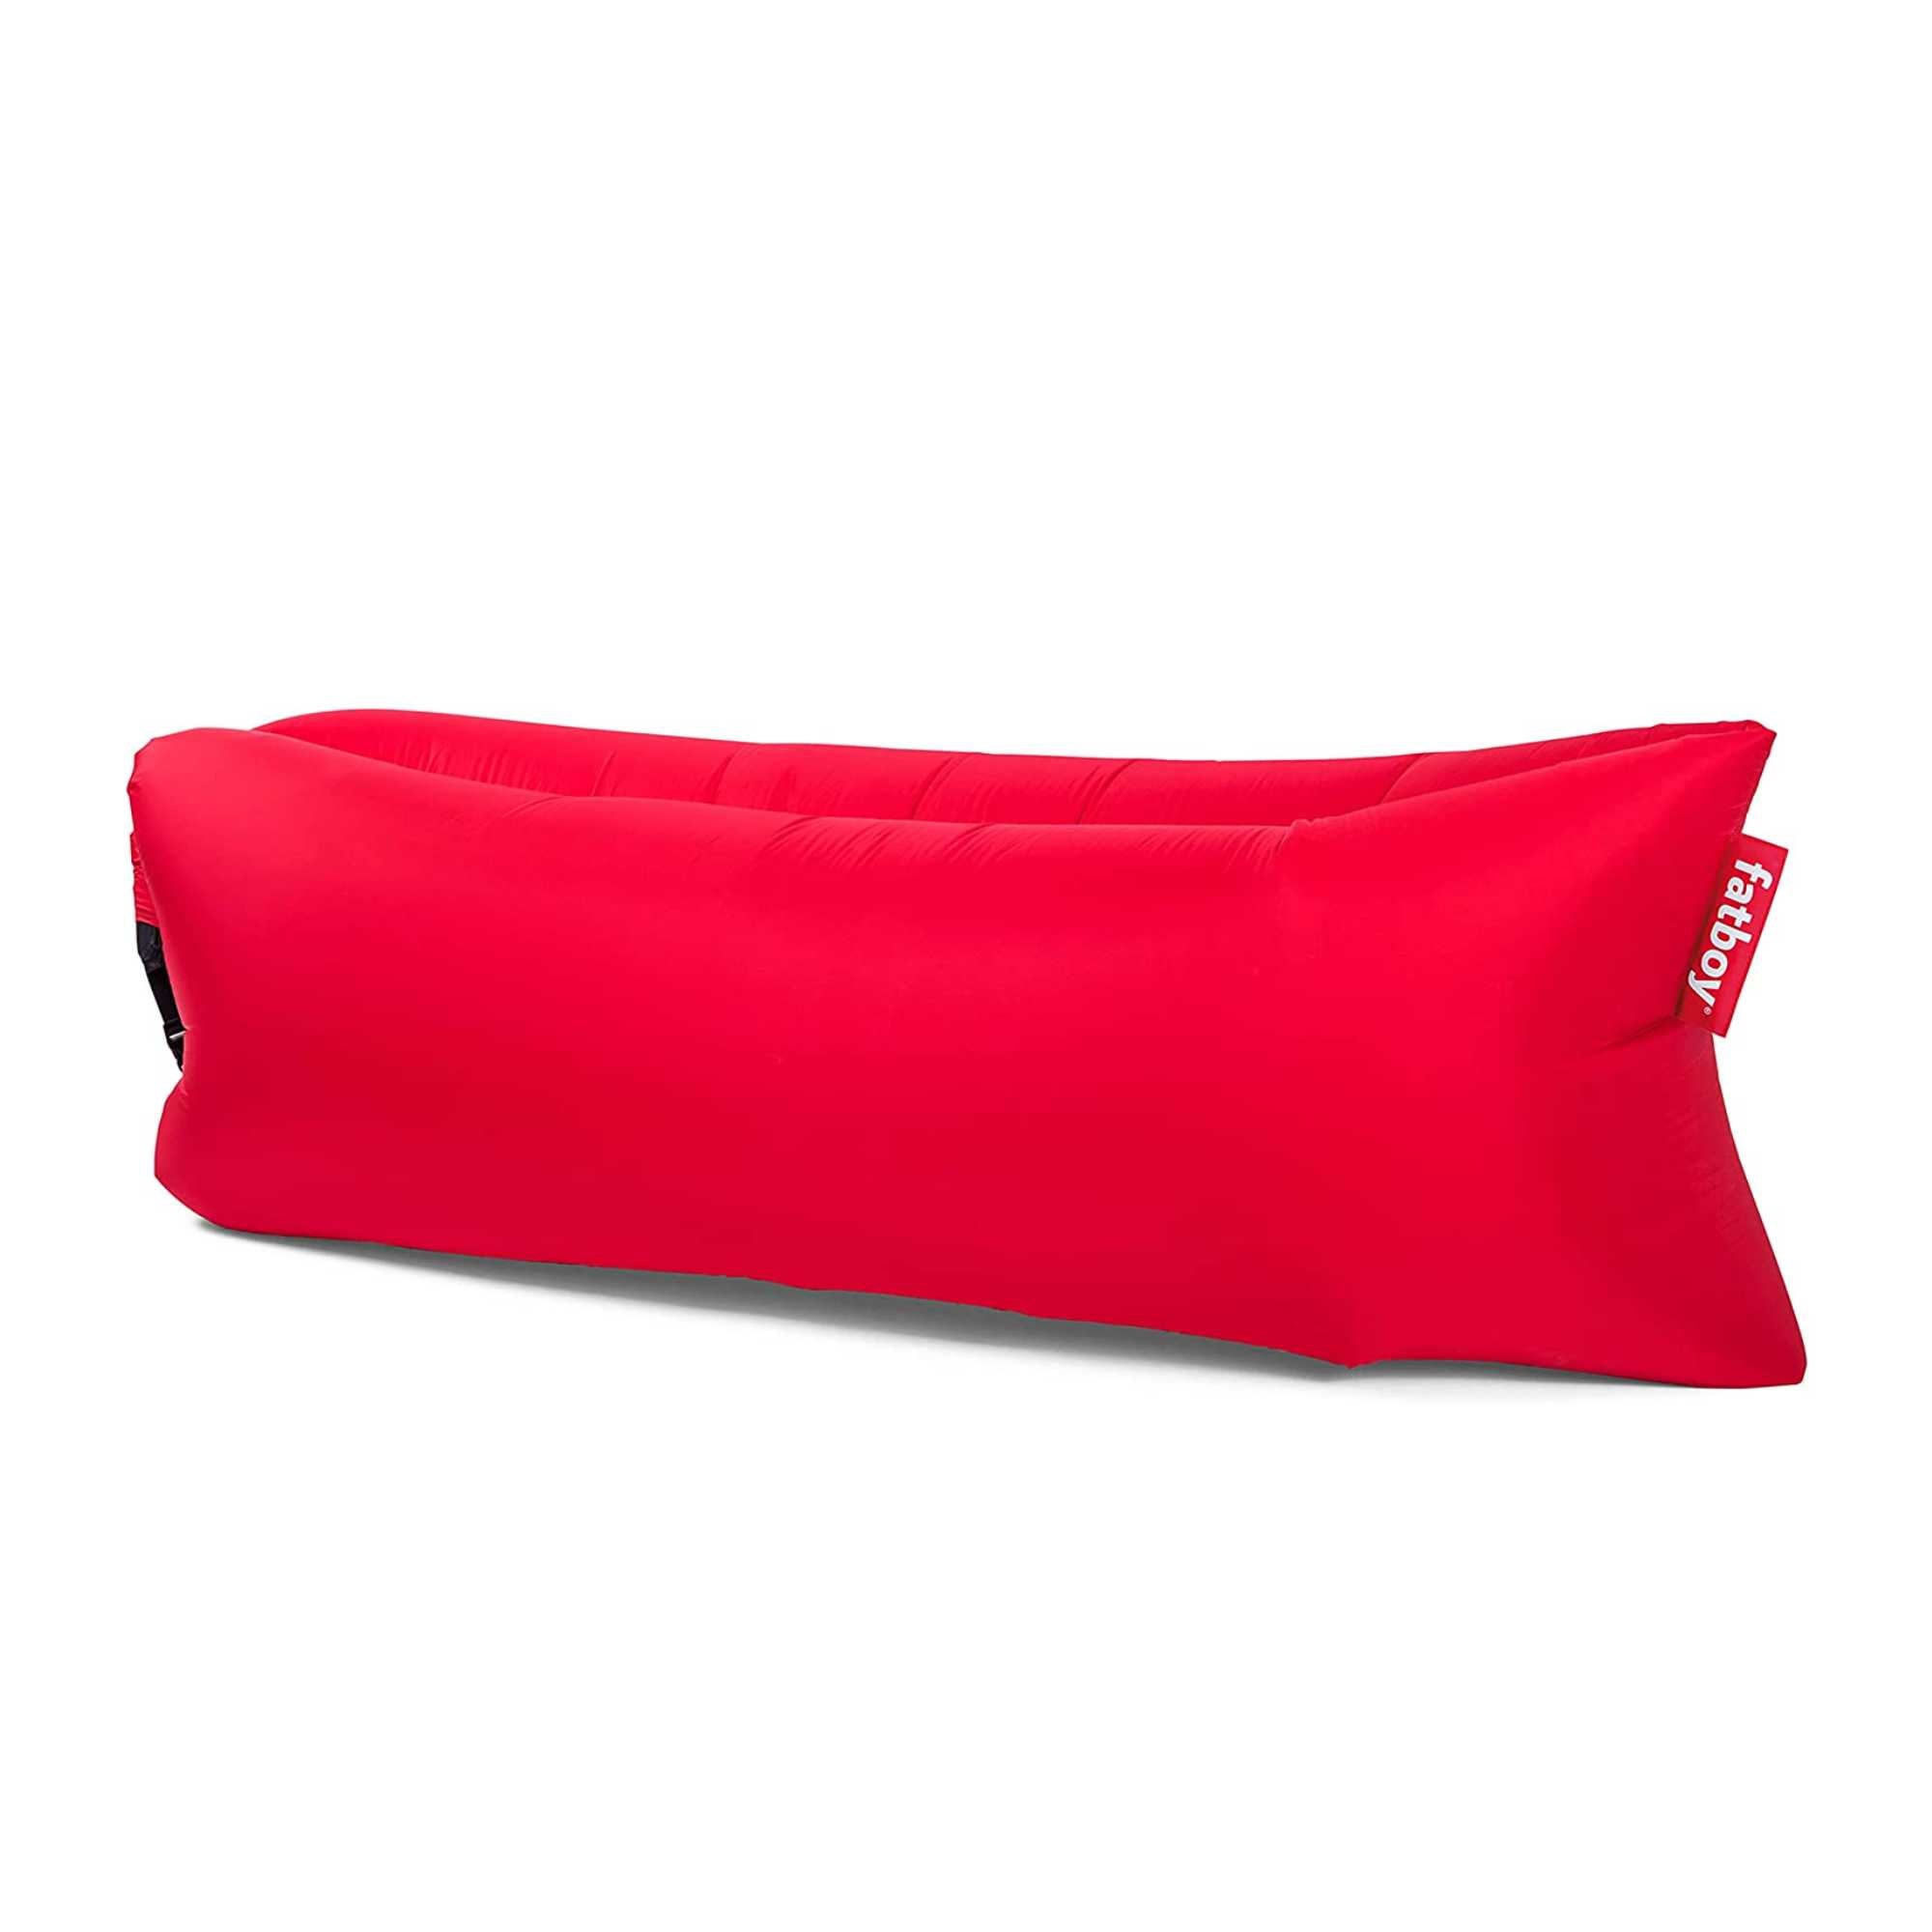 Fatboy Lamzac air lounger, red (outdoor)